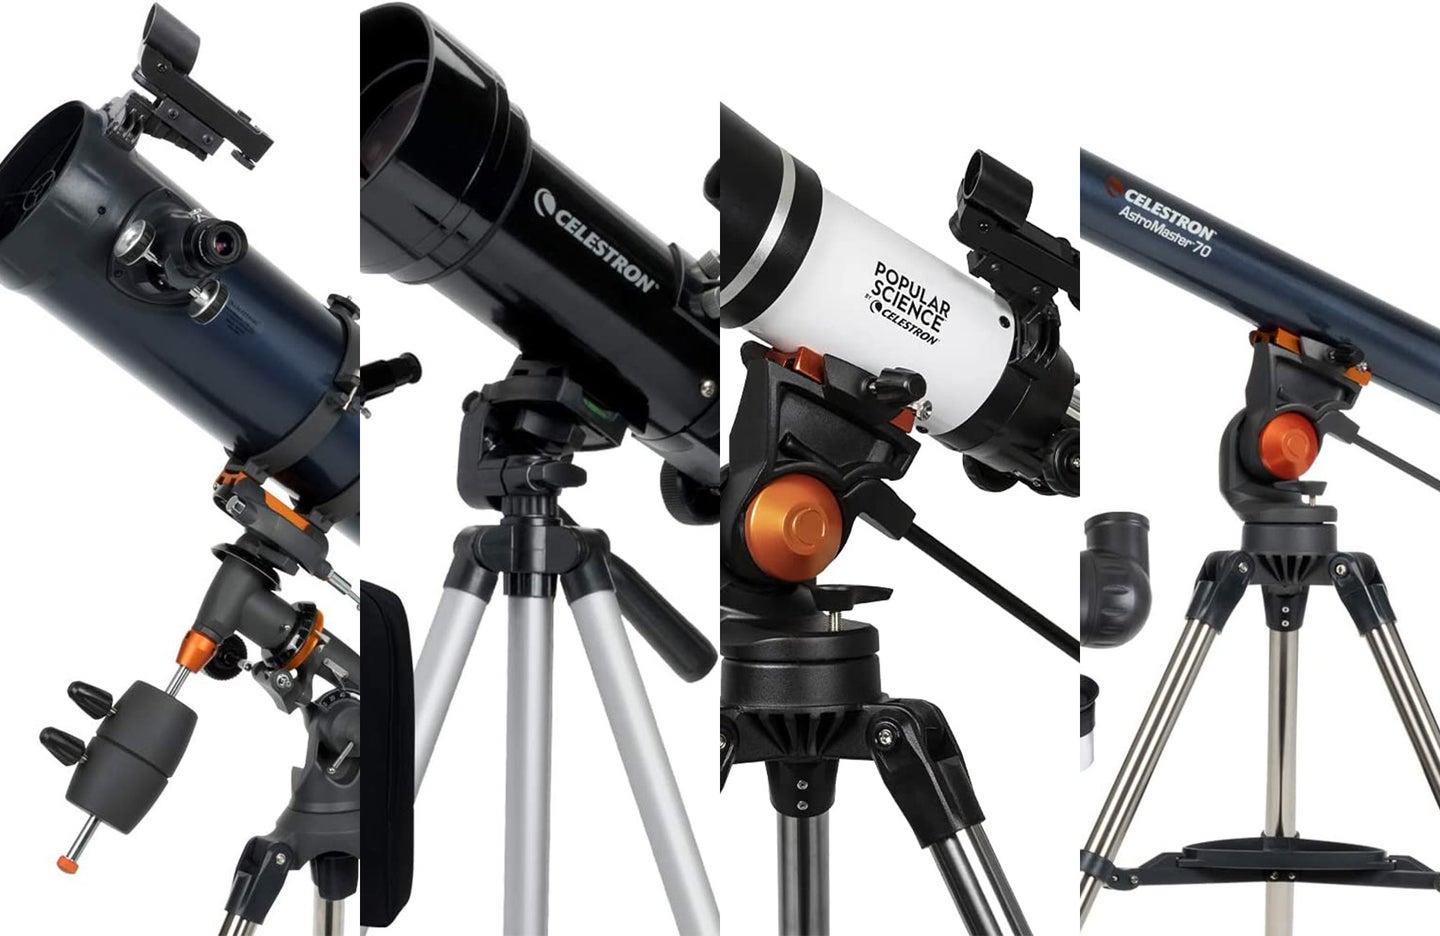 A lineup of telescopes on sale as part of the Amazon Prime Early Access sale